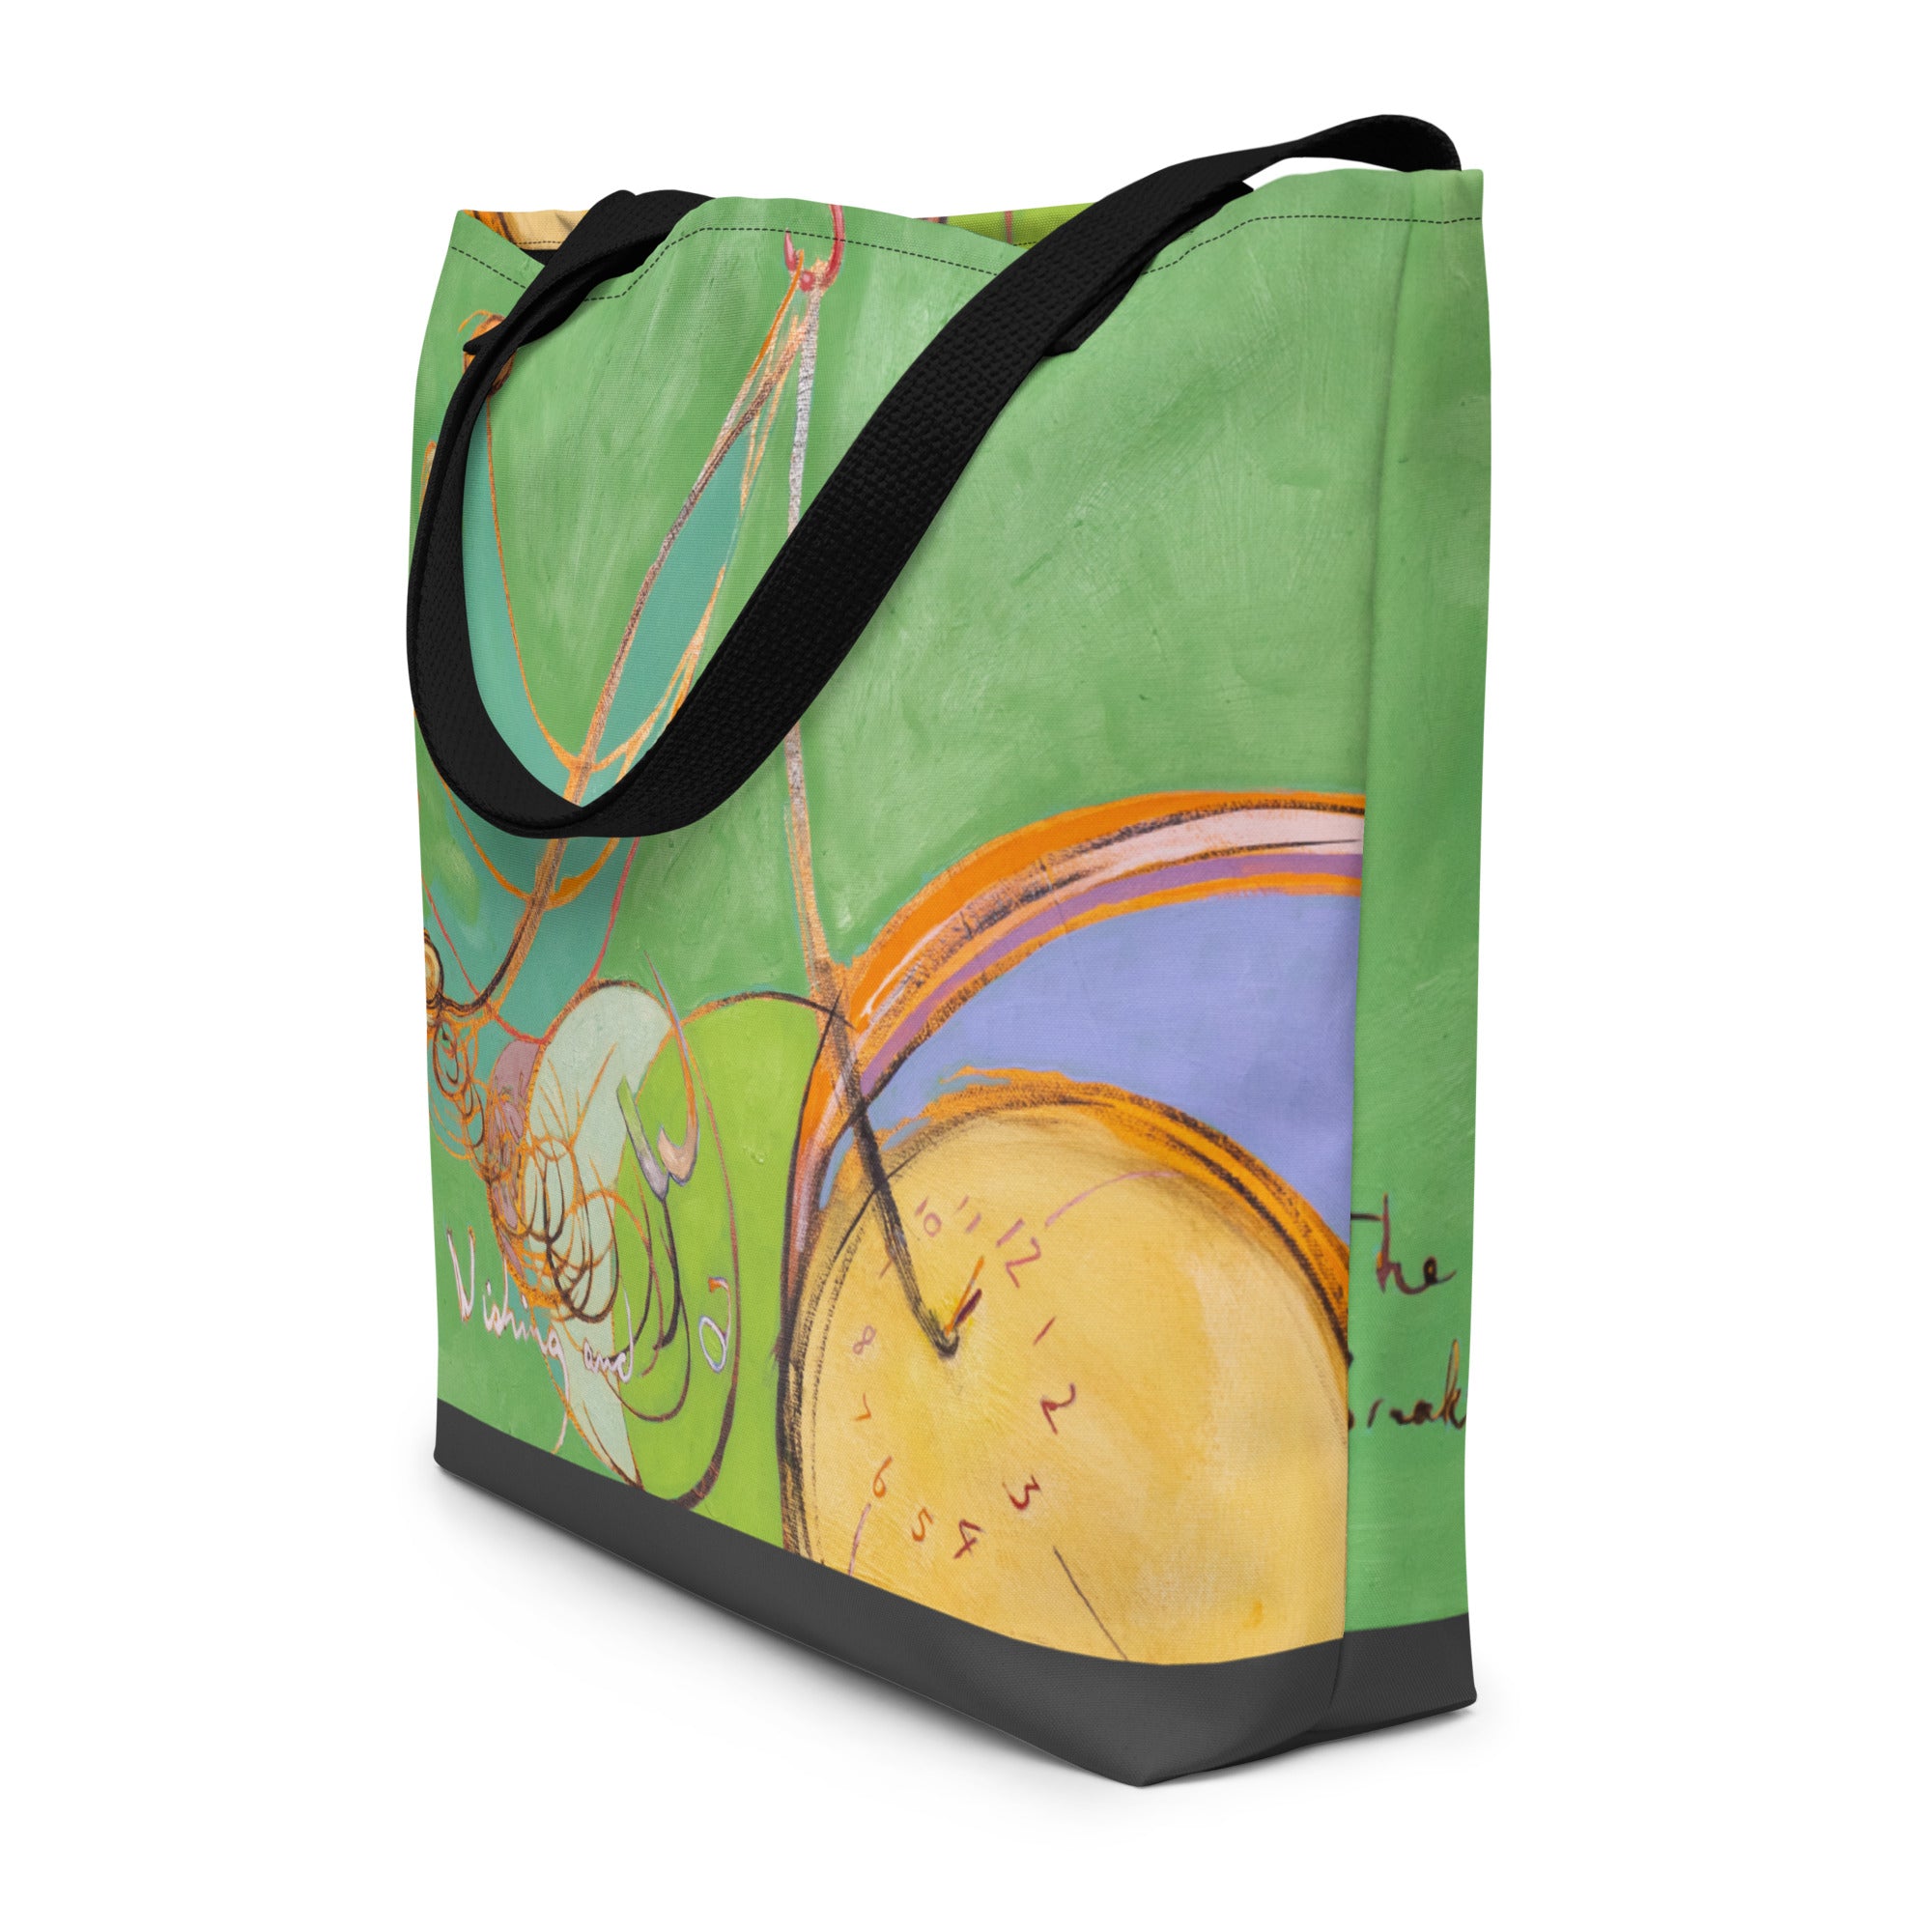 Wishing And Waiting - The Breakthrough [tote bag]